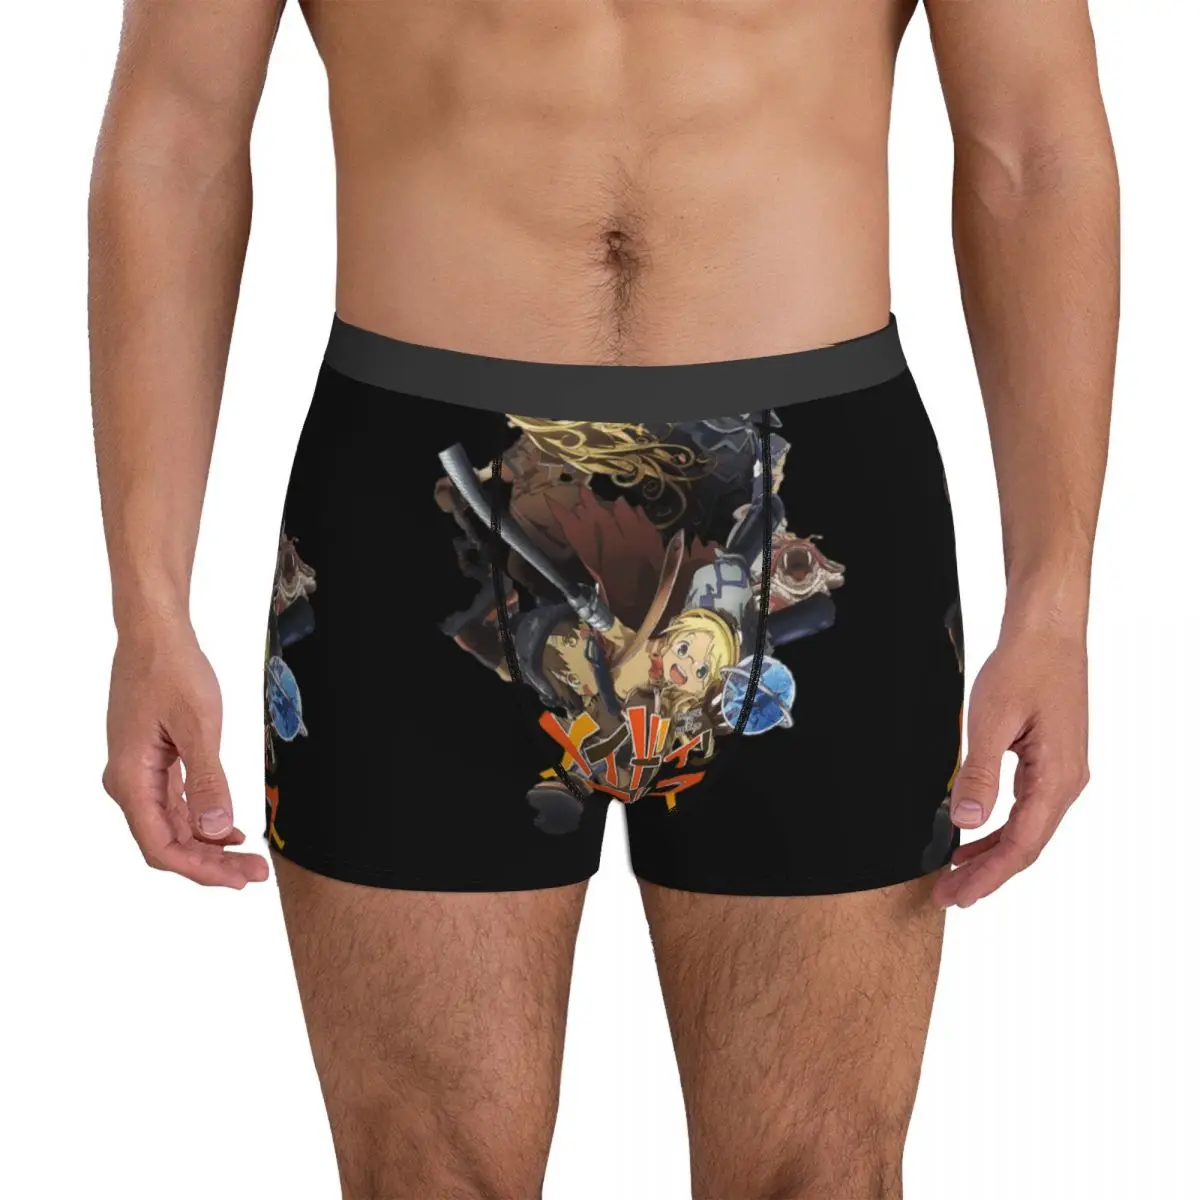 Made In Abyss Anime Underwear the blessing a hollow manga japan Males Shorts Briefs Soft Trunk High Quality Printed Underpants